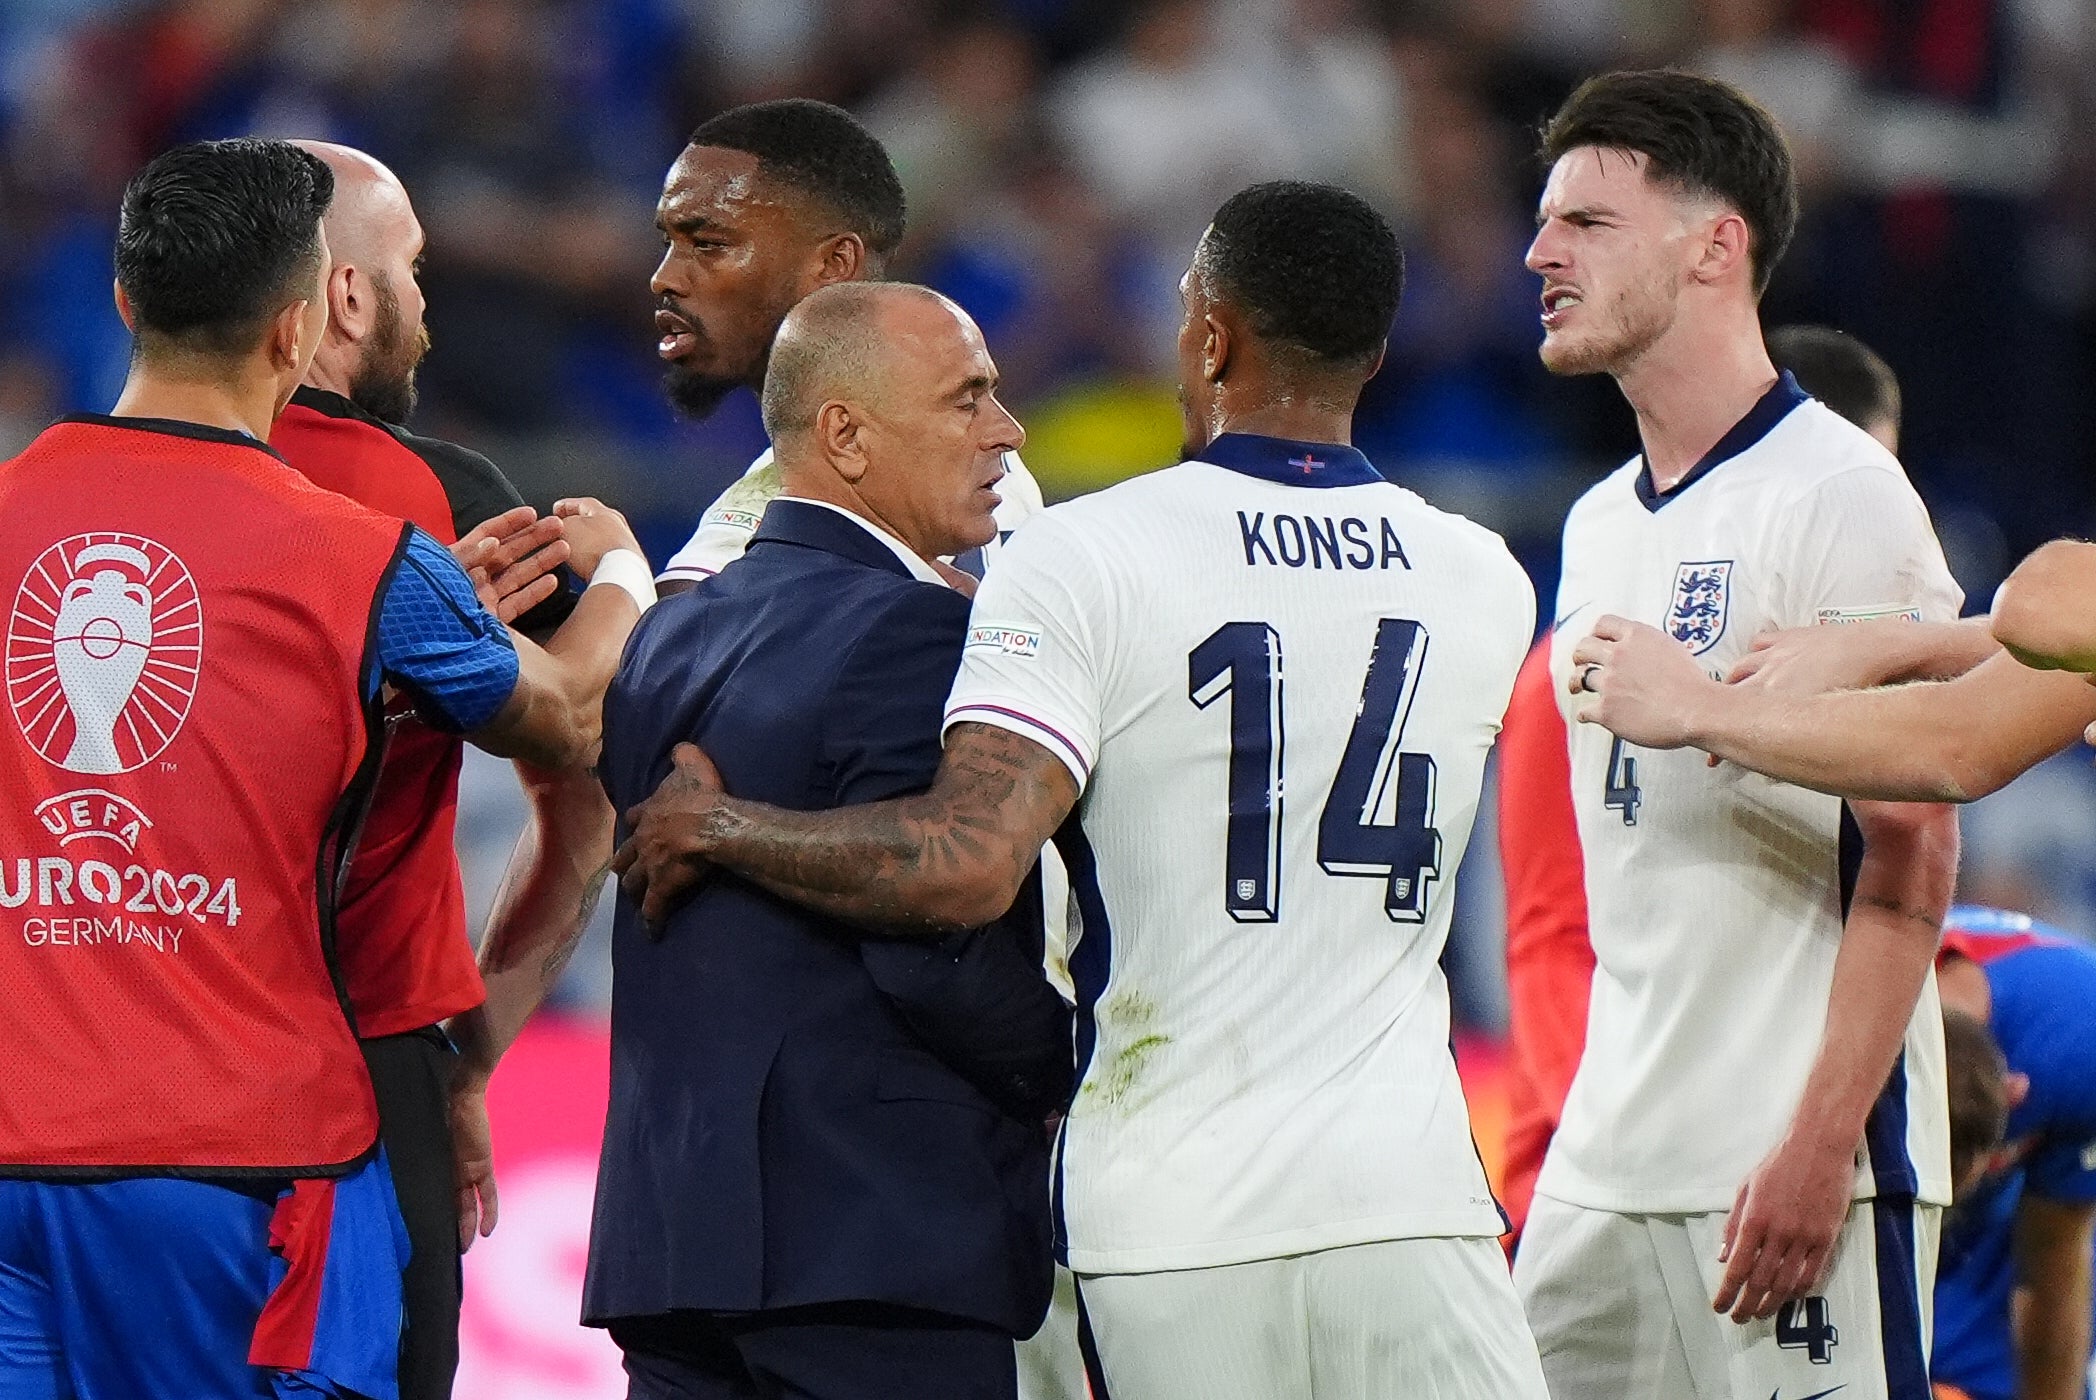 Slovakia manager Francesco Calzona played down an incident with Declan Rice after the match (Bradley Collyer/PA)